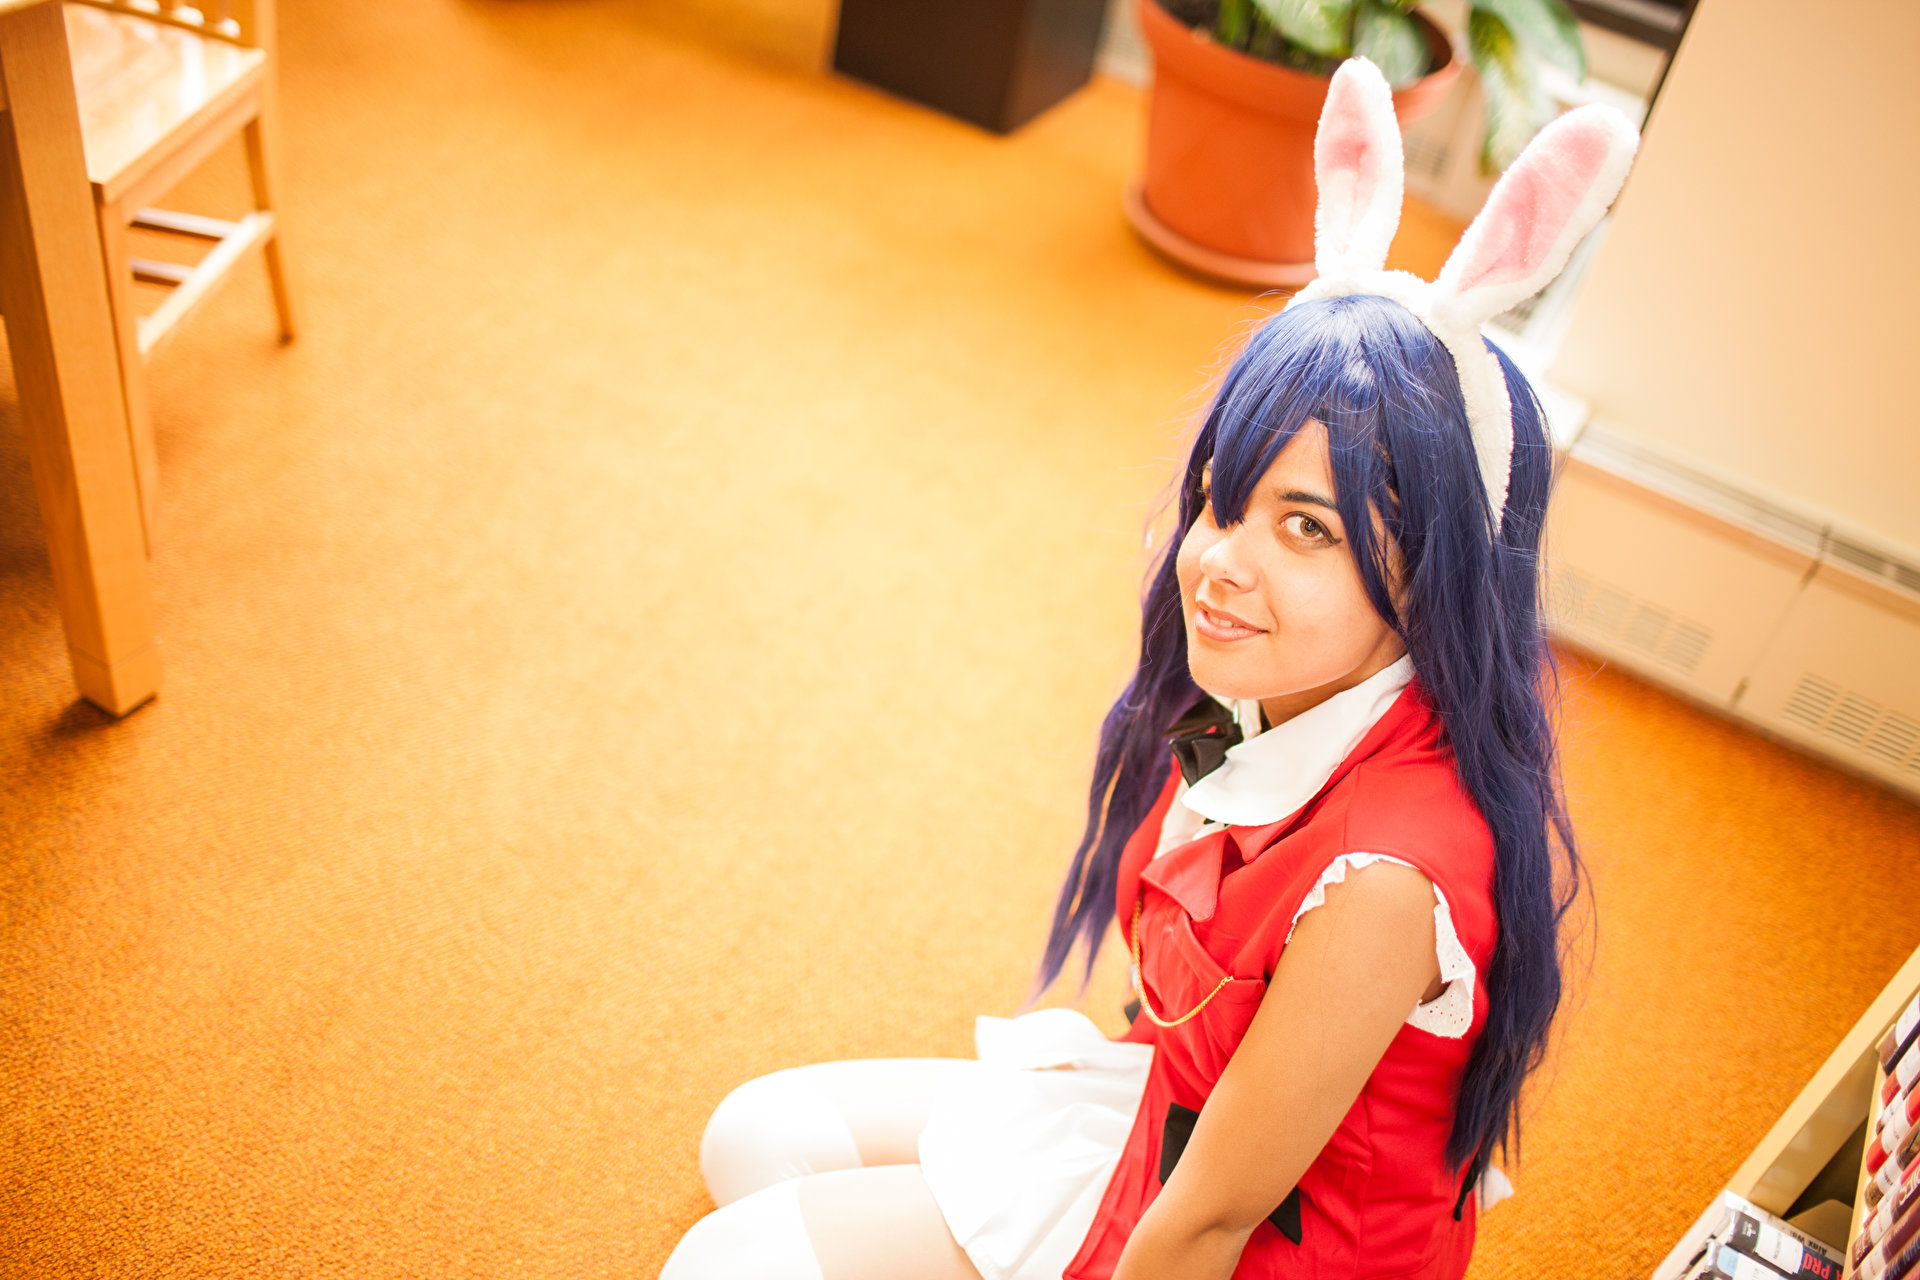 Cospix.net photo featuring Little Star Cosplay